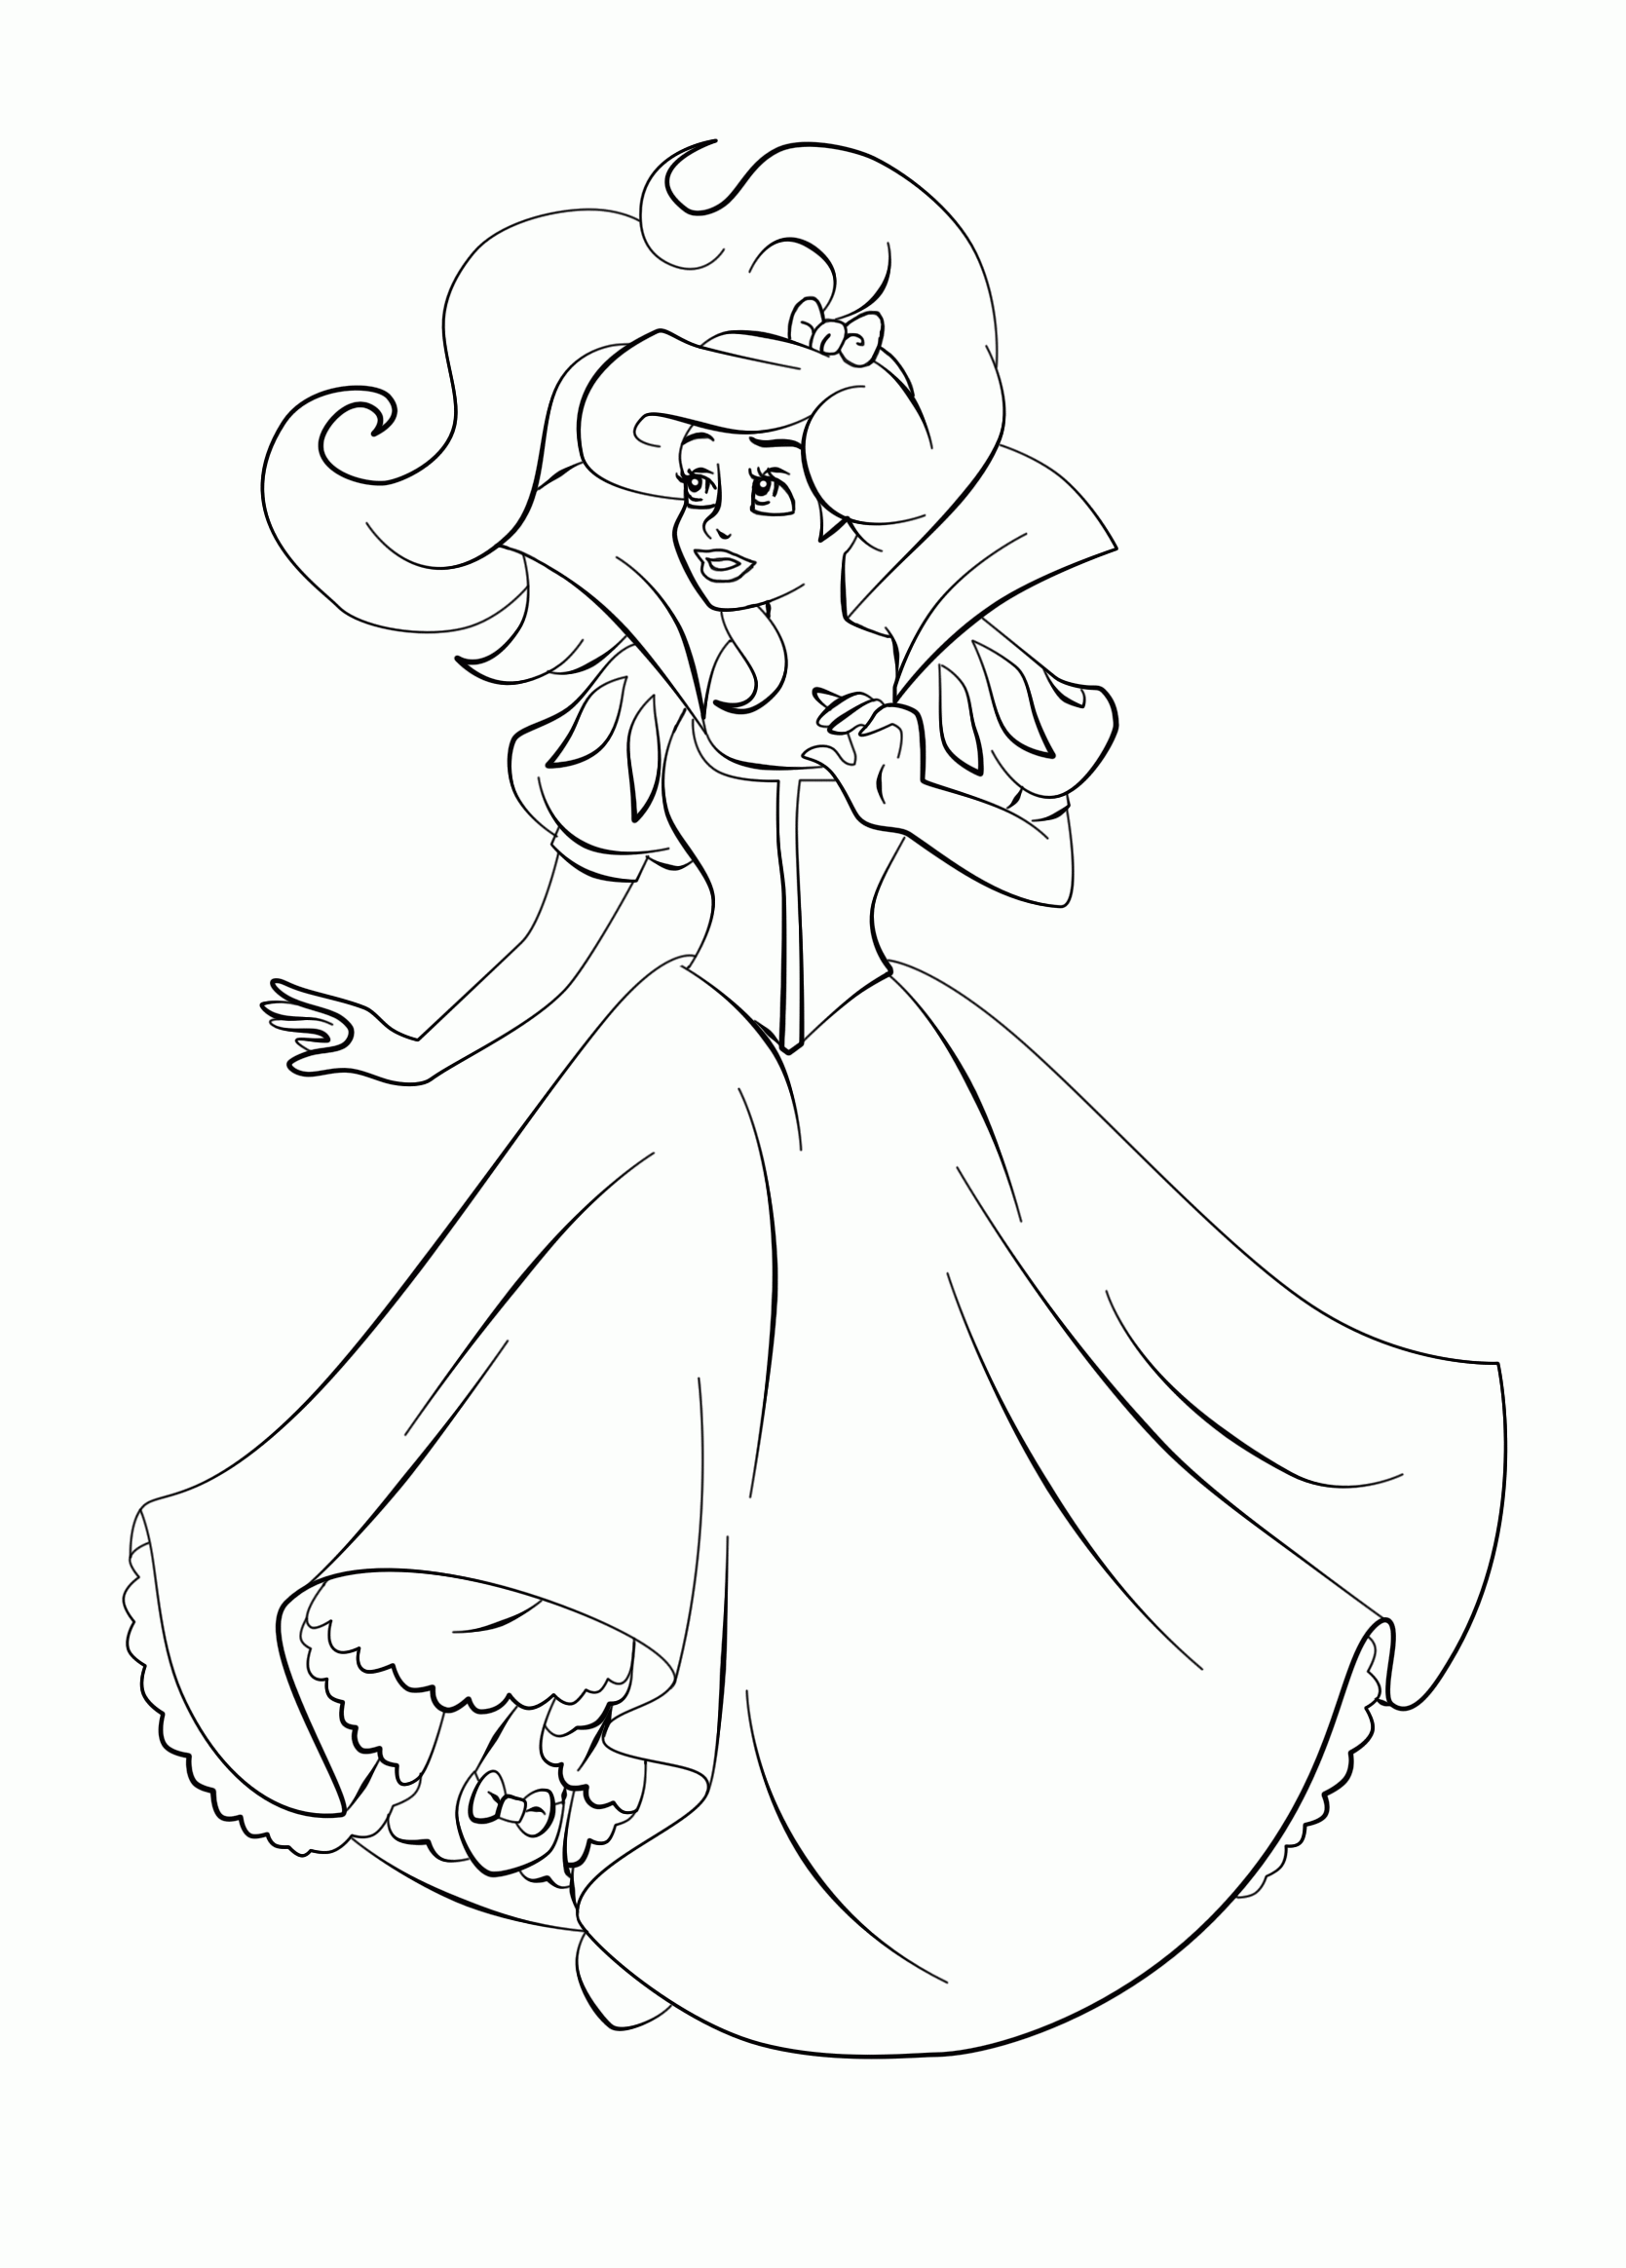 Printable Princess Ariel Coloring Pages   High Quality Coloring ...